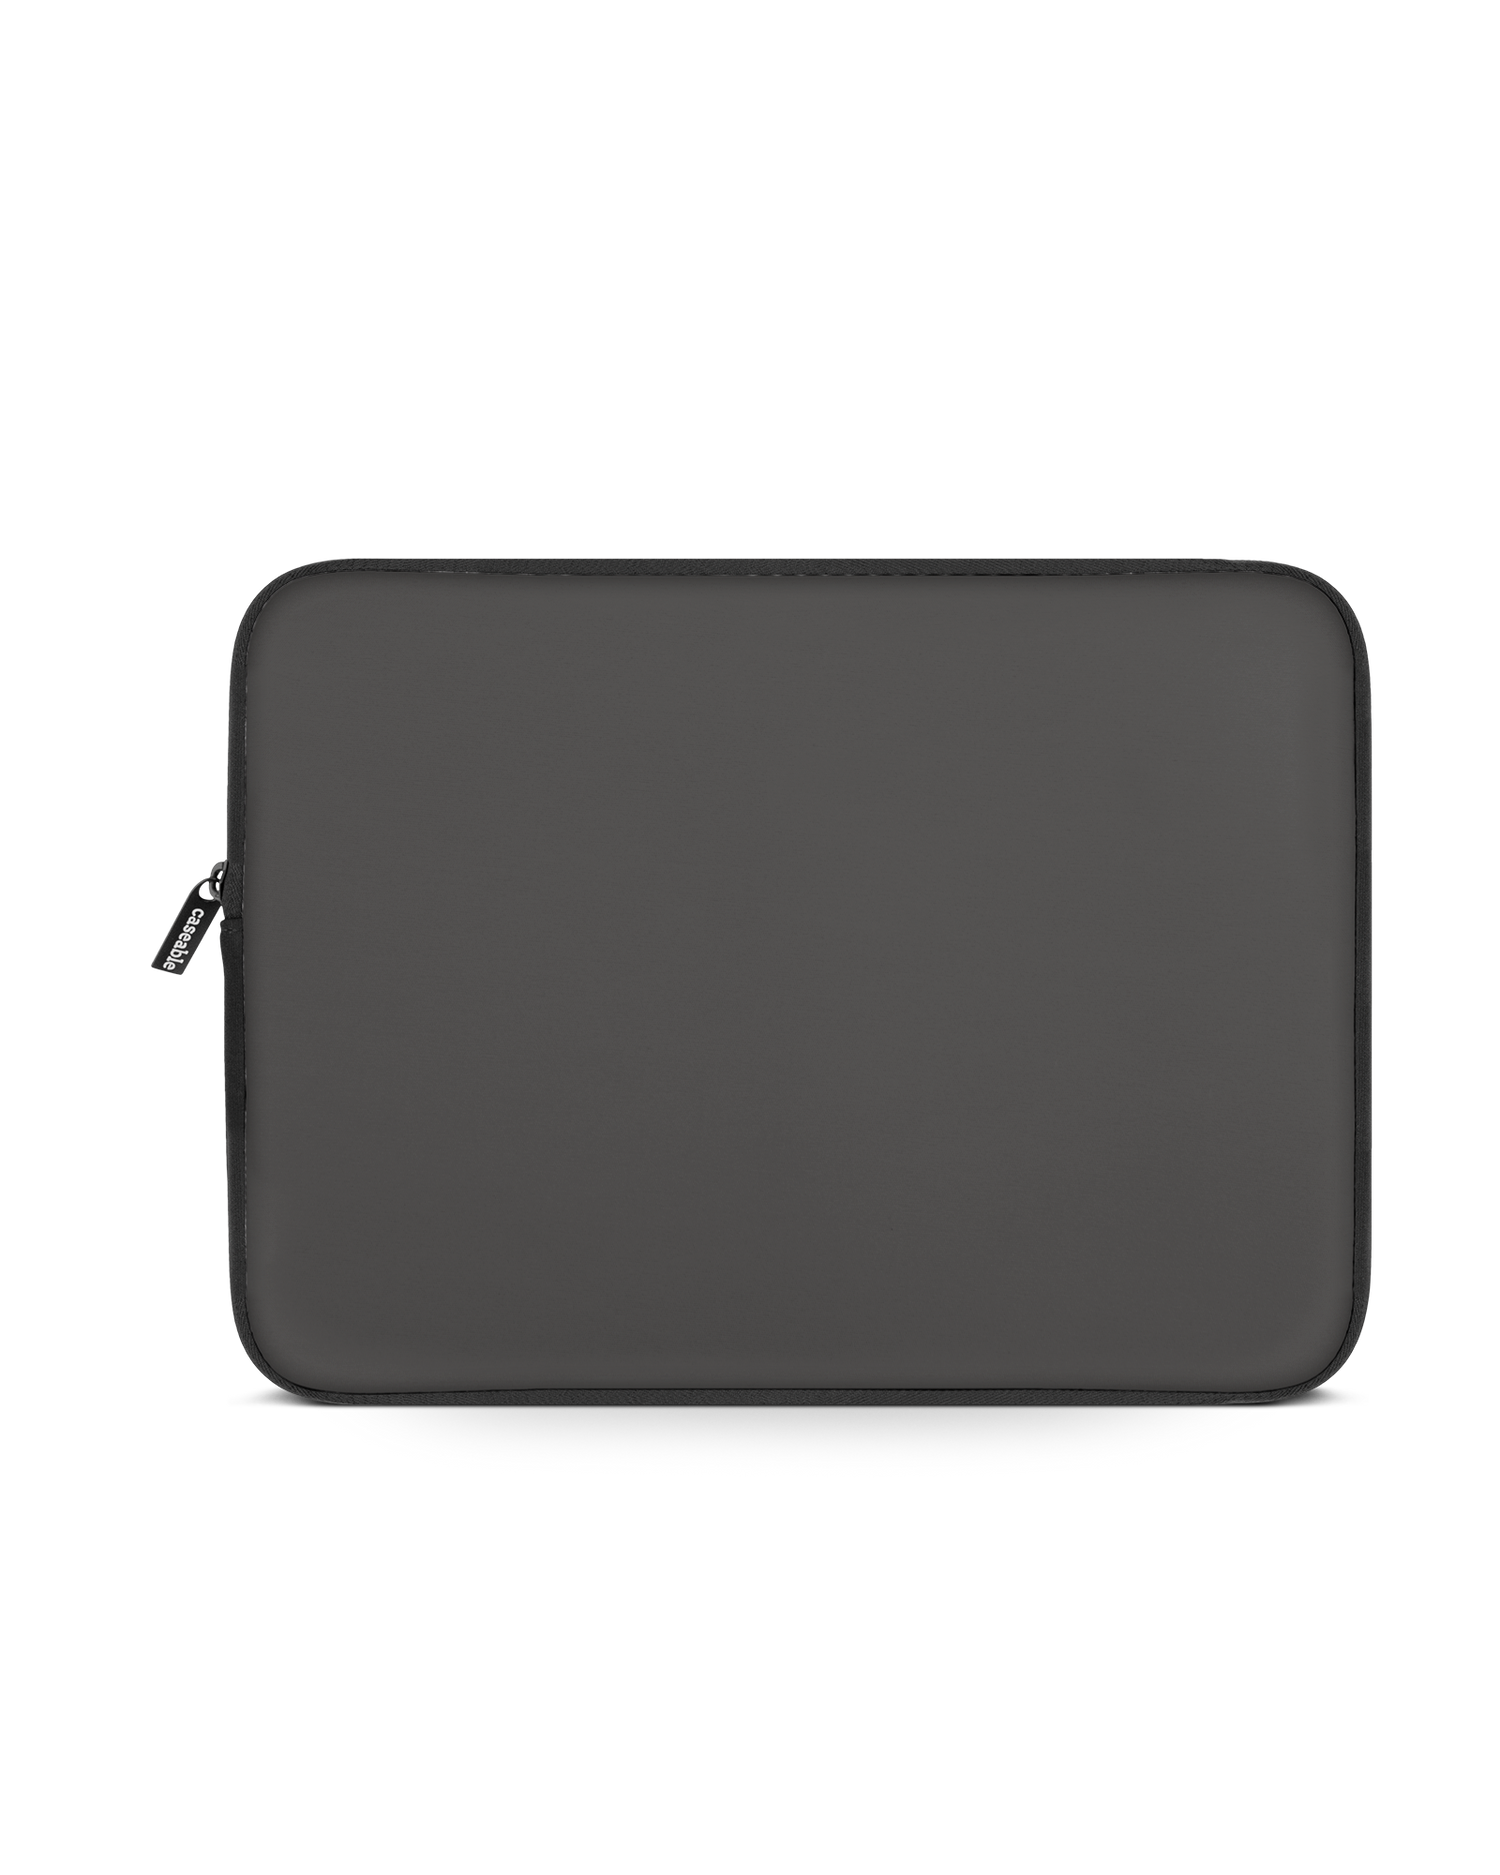 SPACE GREY Laptop Case 13 inch: Front View